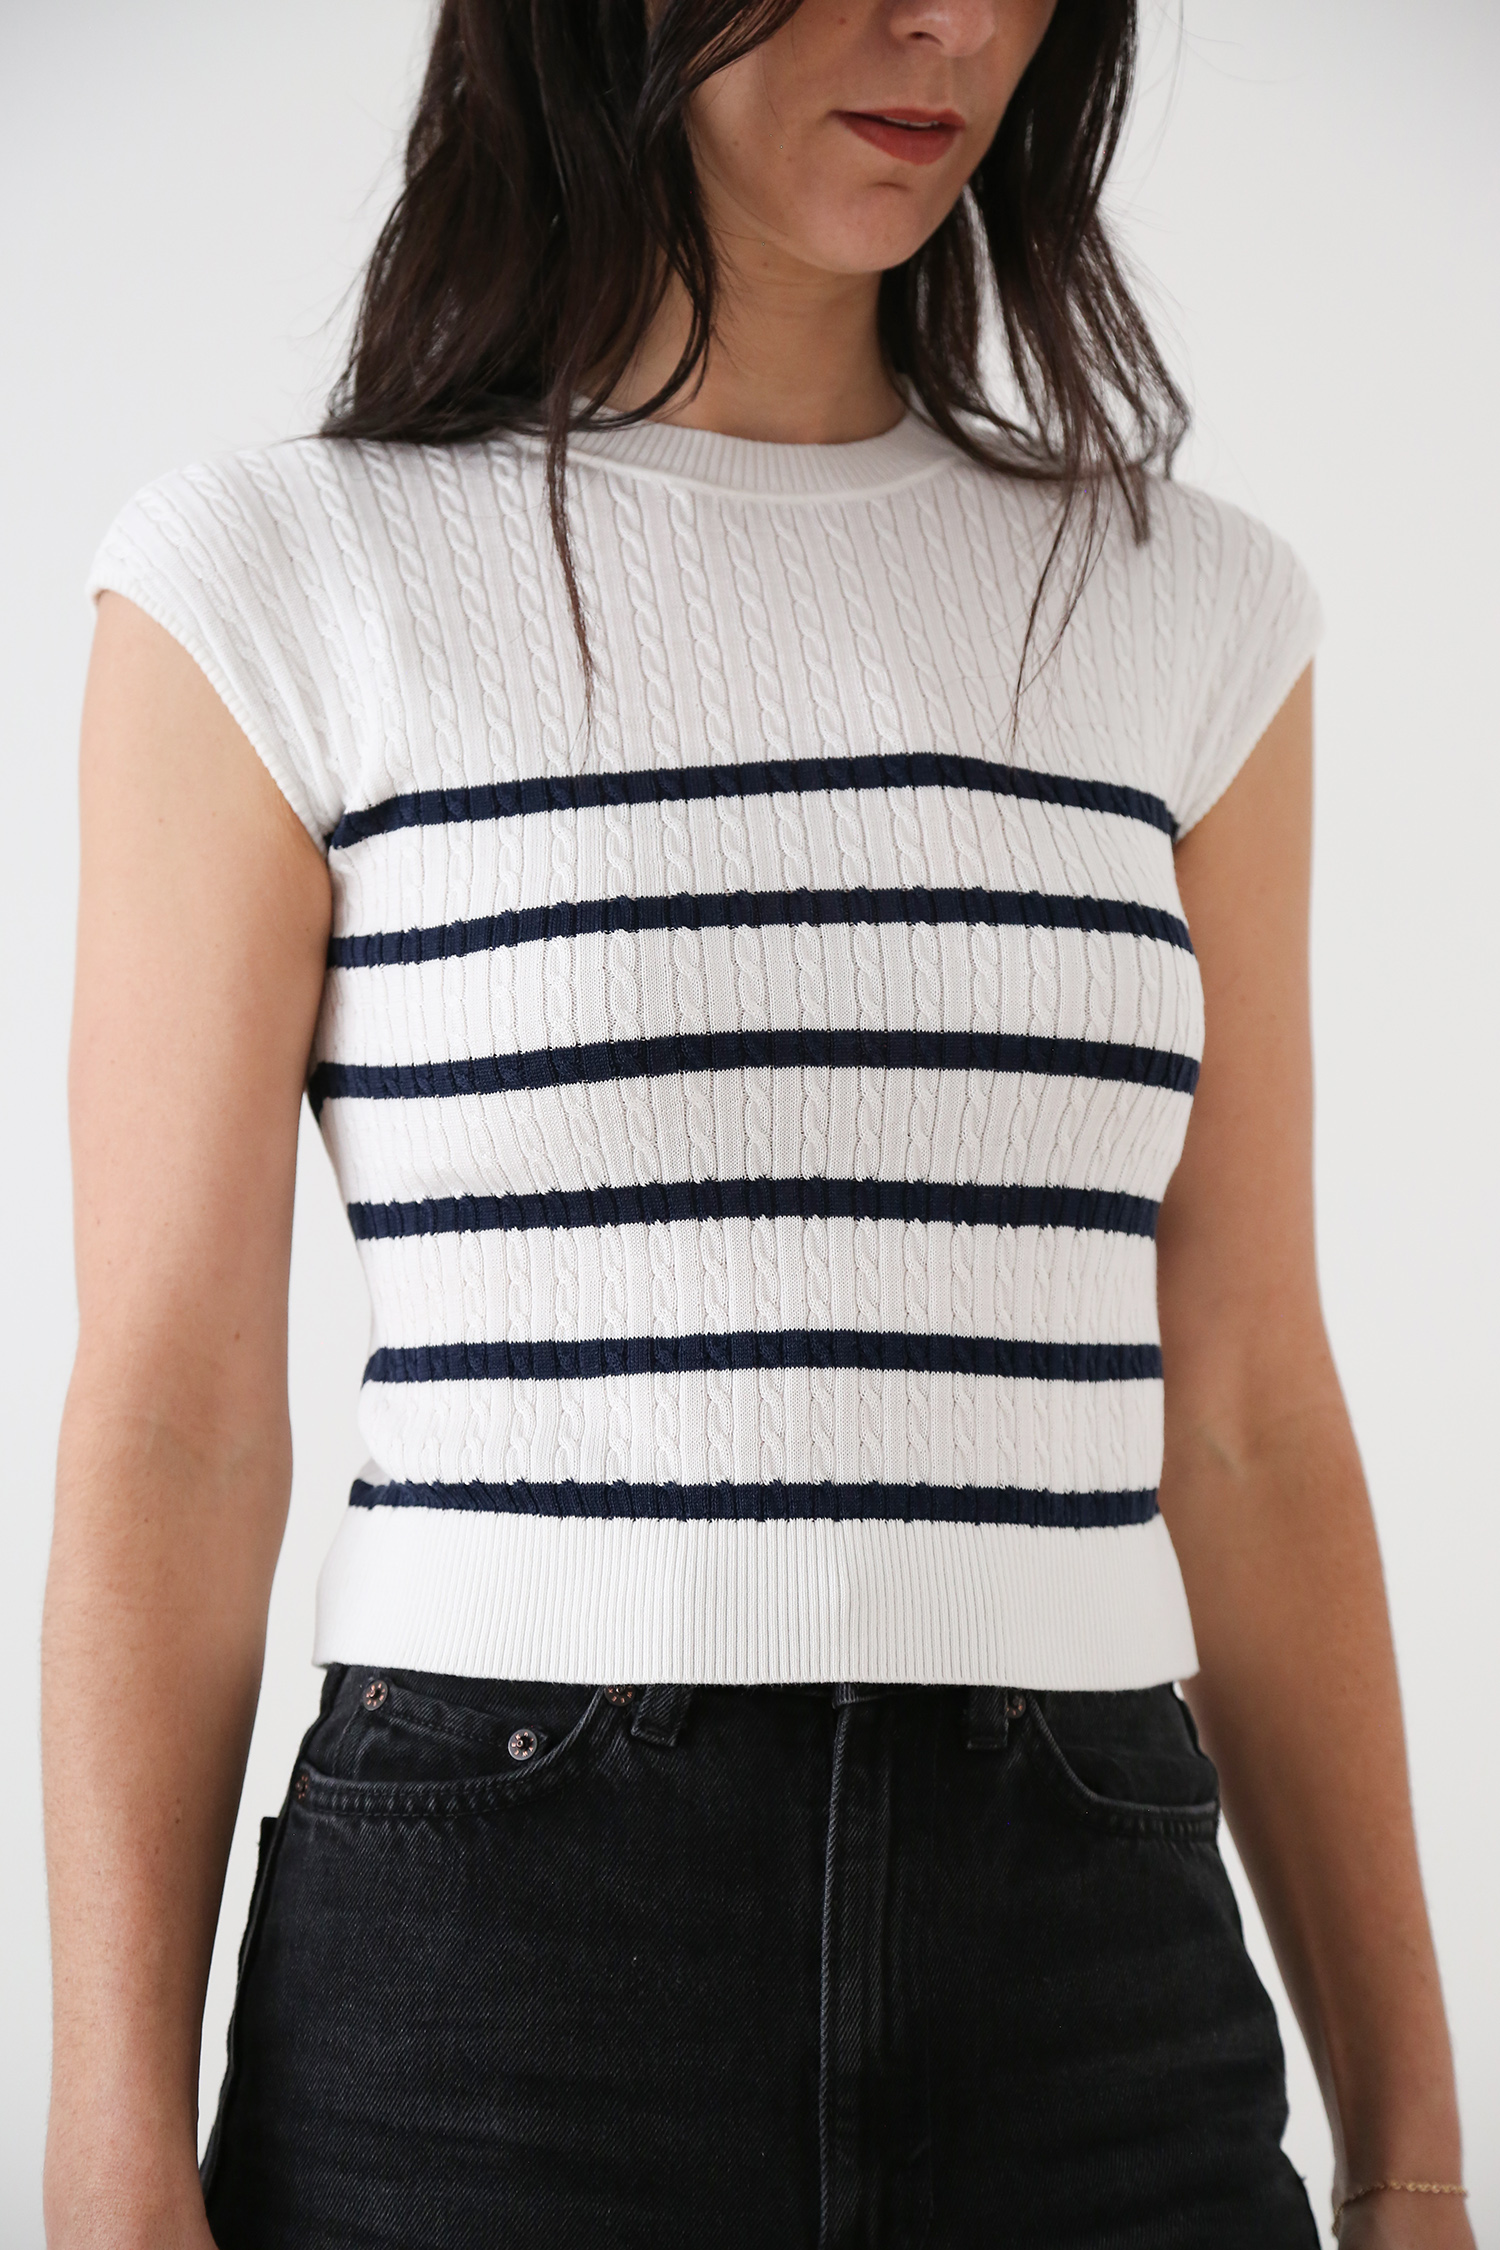 Goelia Acetate Knitted Striped Pullover Review